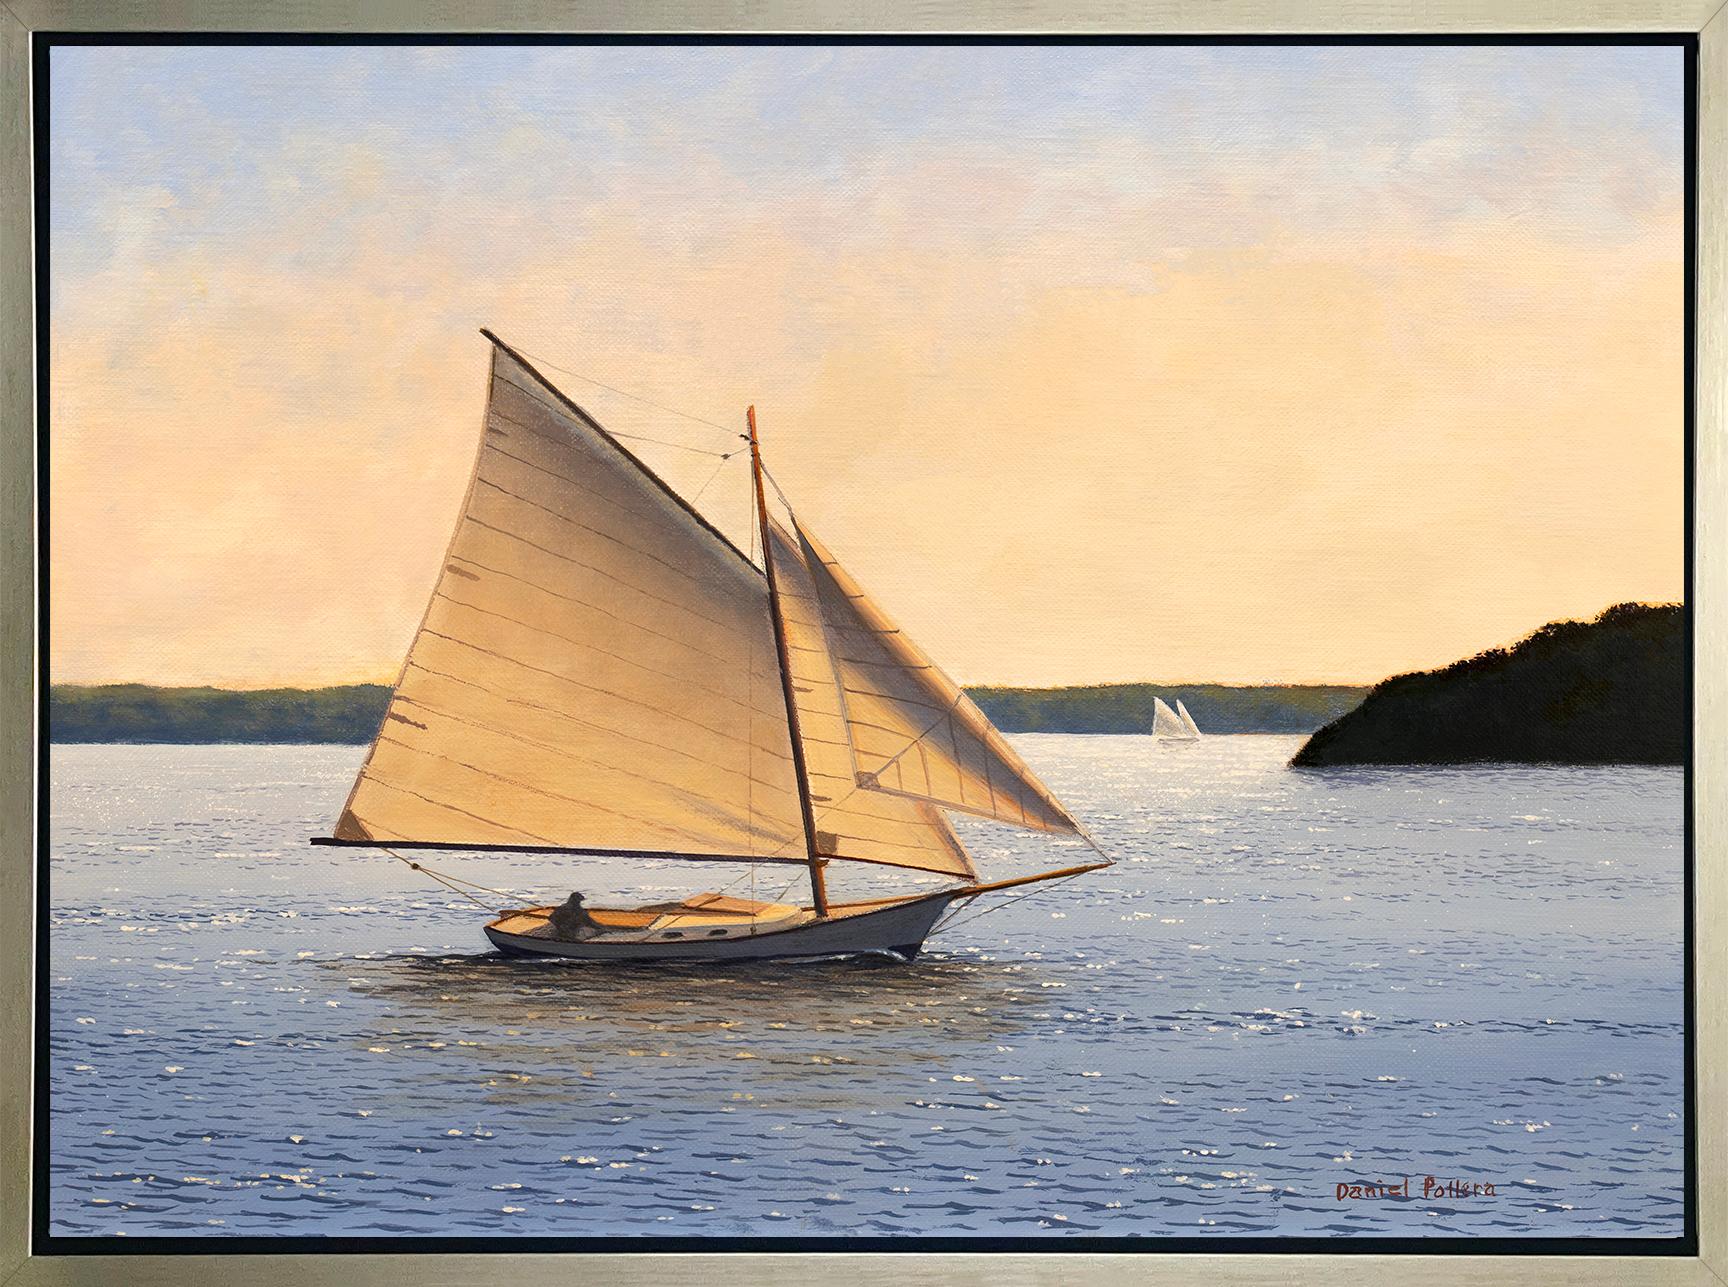 Daniel Pollera Landscape Print - "Sailing Out to Sea, " Framed Limited Edition Giclee Print, 12" x 16"